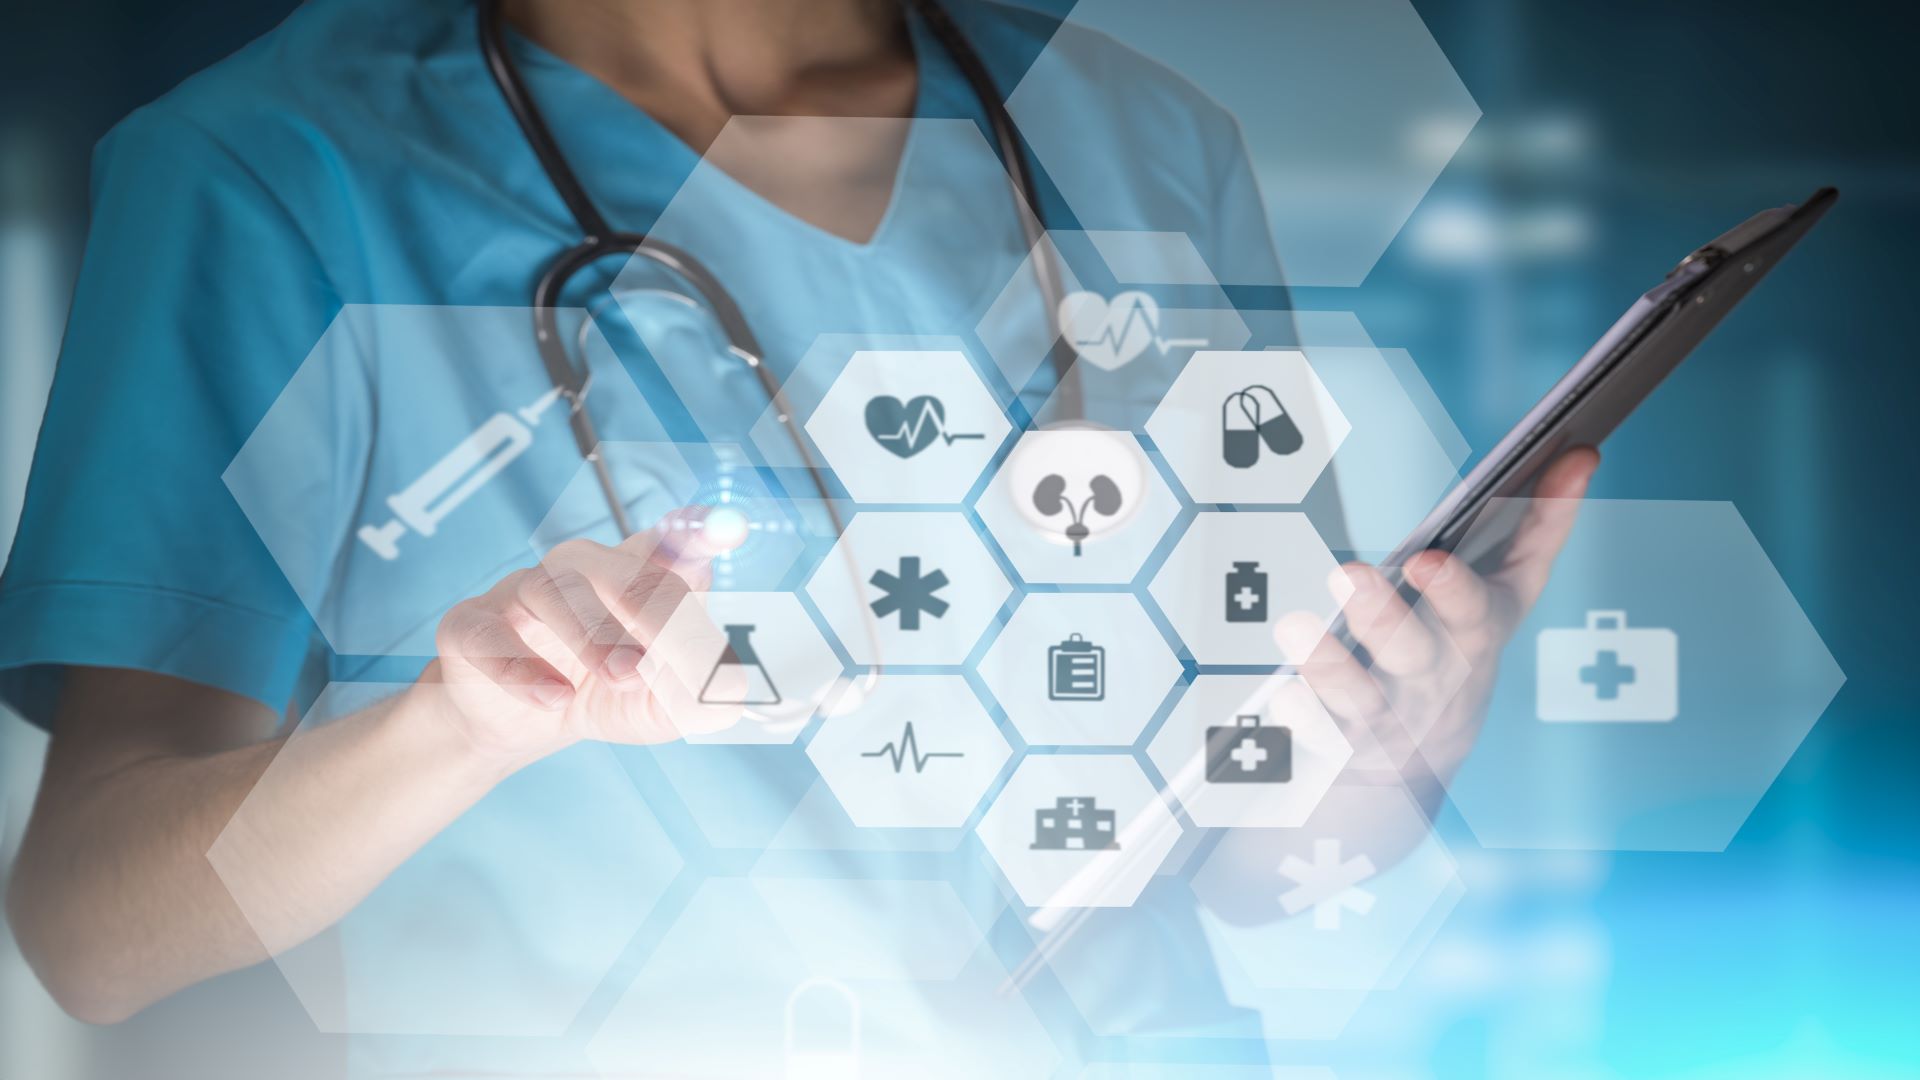 The digitalisation of healthcare